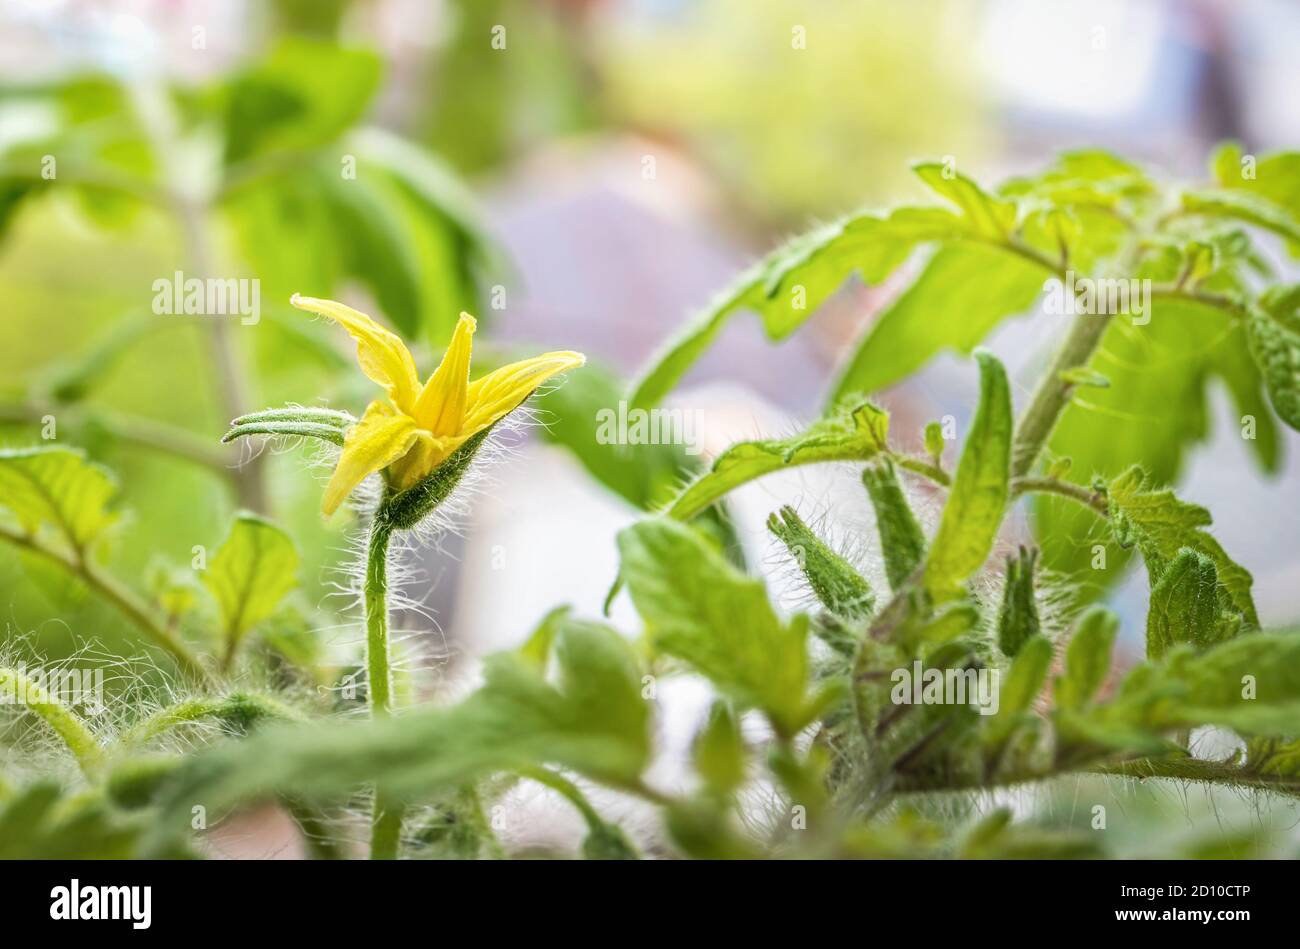 Close up of cherry tomato blossom. First yellow open flower. Soft closed buds and leaves. Tomato plant determinate 'Tumbling Tom Red' on window sill. Stock Photo